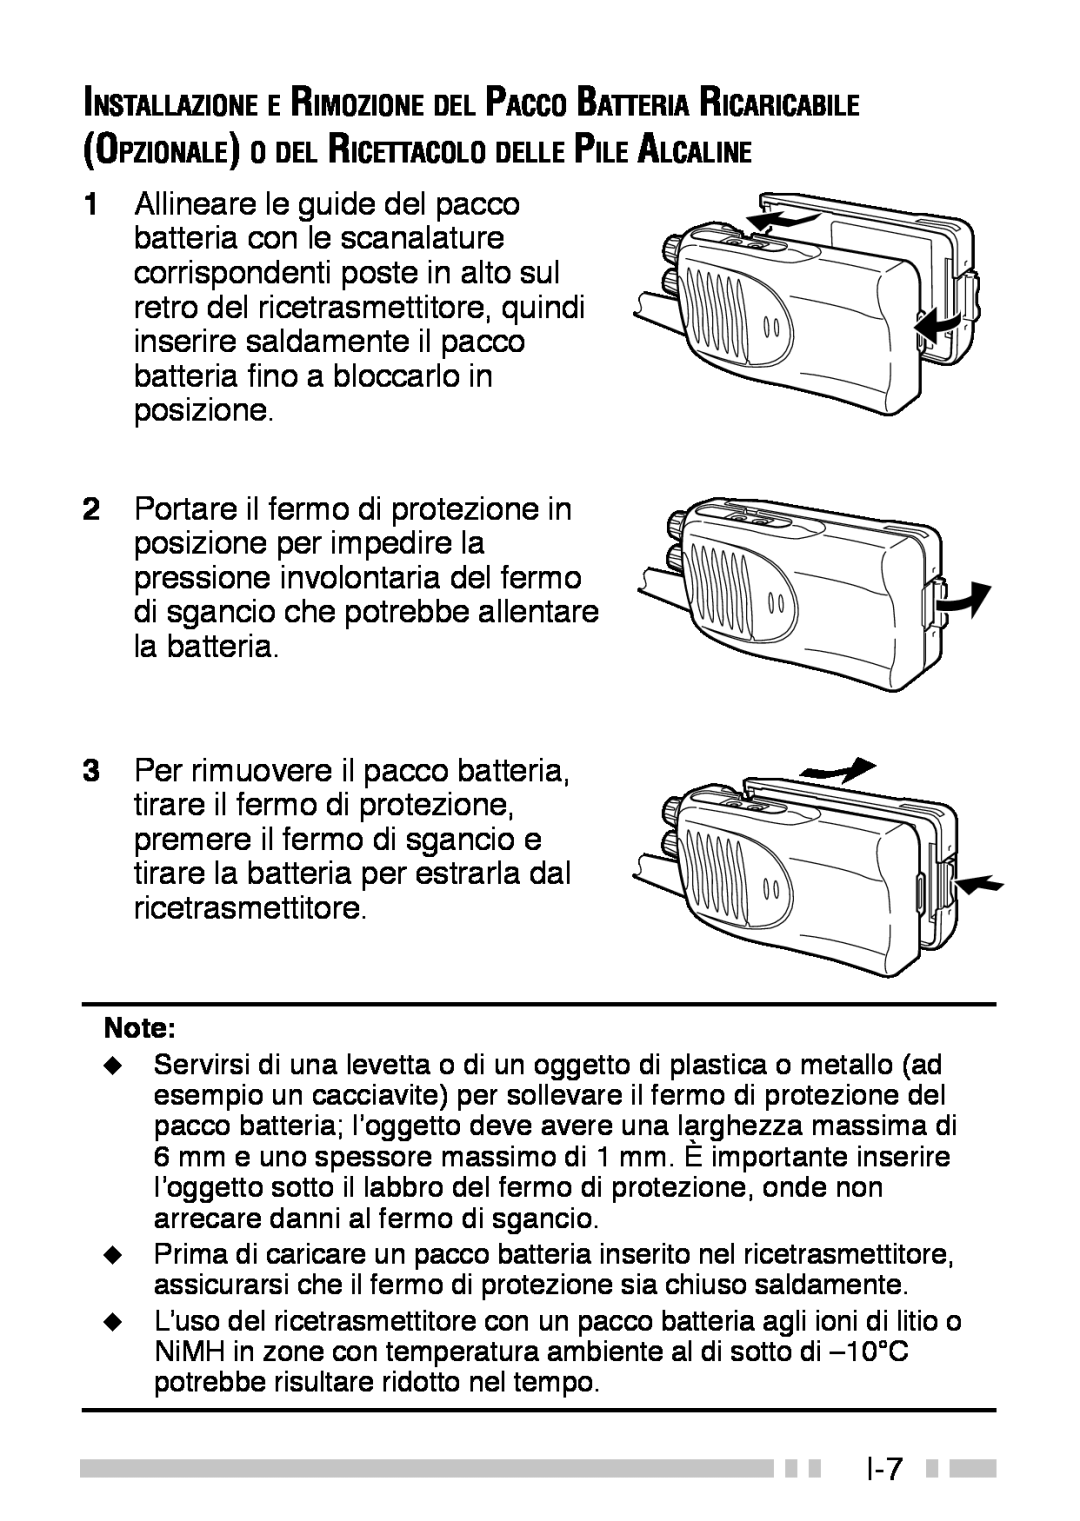 Kenwood TK-3160 instruction manual 1Allineare le guide del pacco 